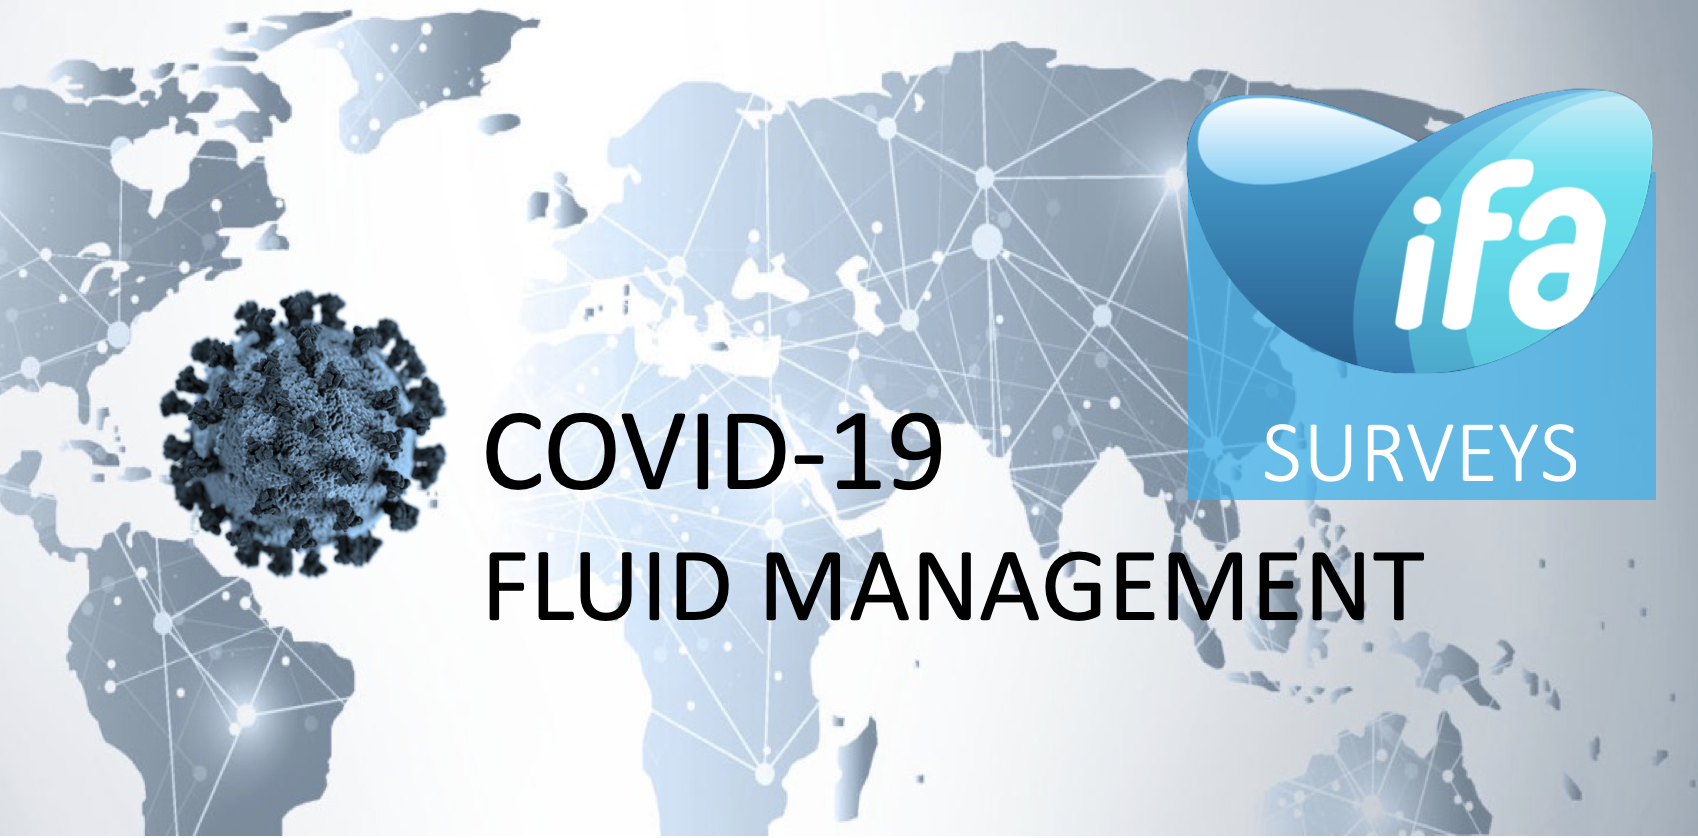 Fill in #COVID19 survey on Fluid Management